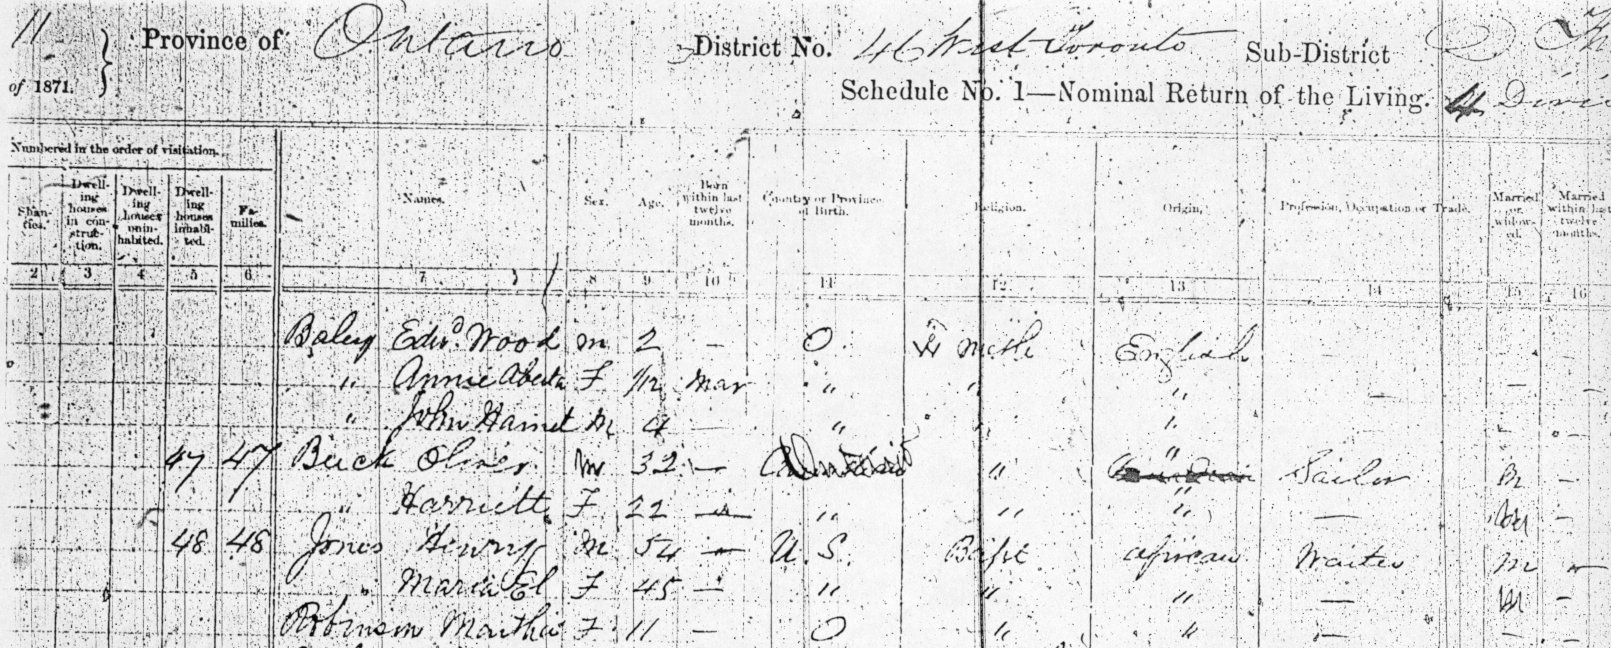 1871 Ontario Census record for Oliver Butts Buck